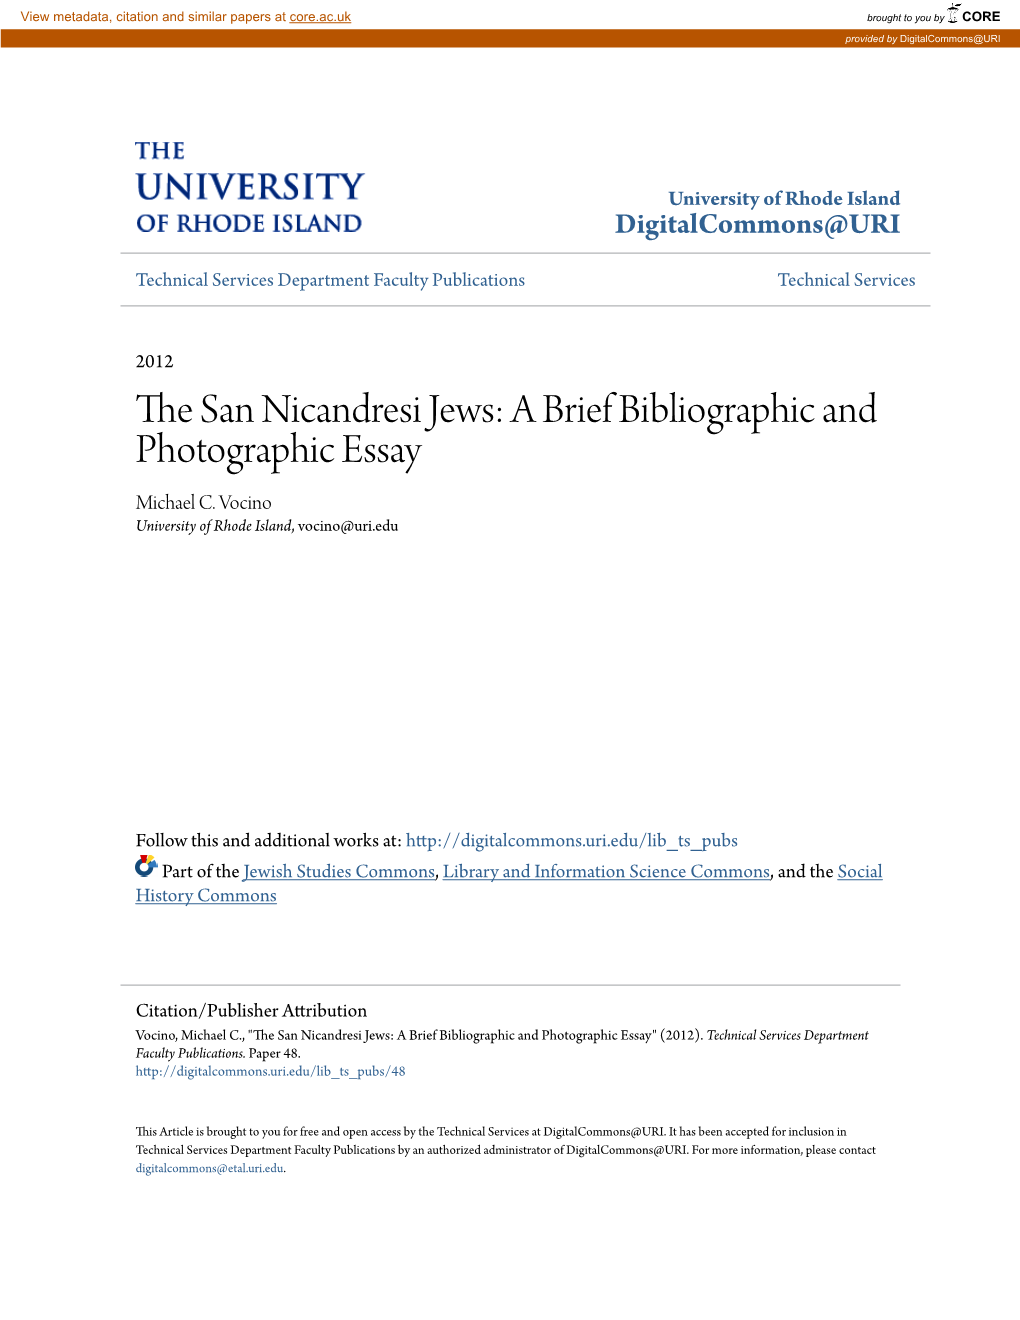 The San Nicandresi Jews: a Brief Bibliographic and Photographic Essay by Michael Vocino 15 March 2012